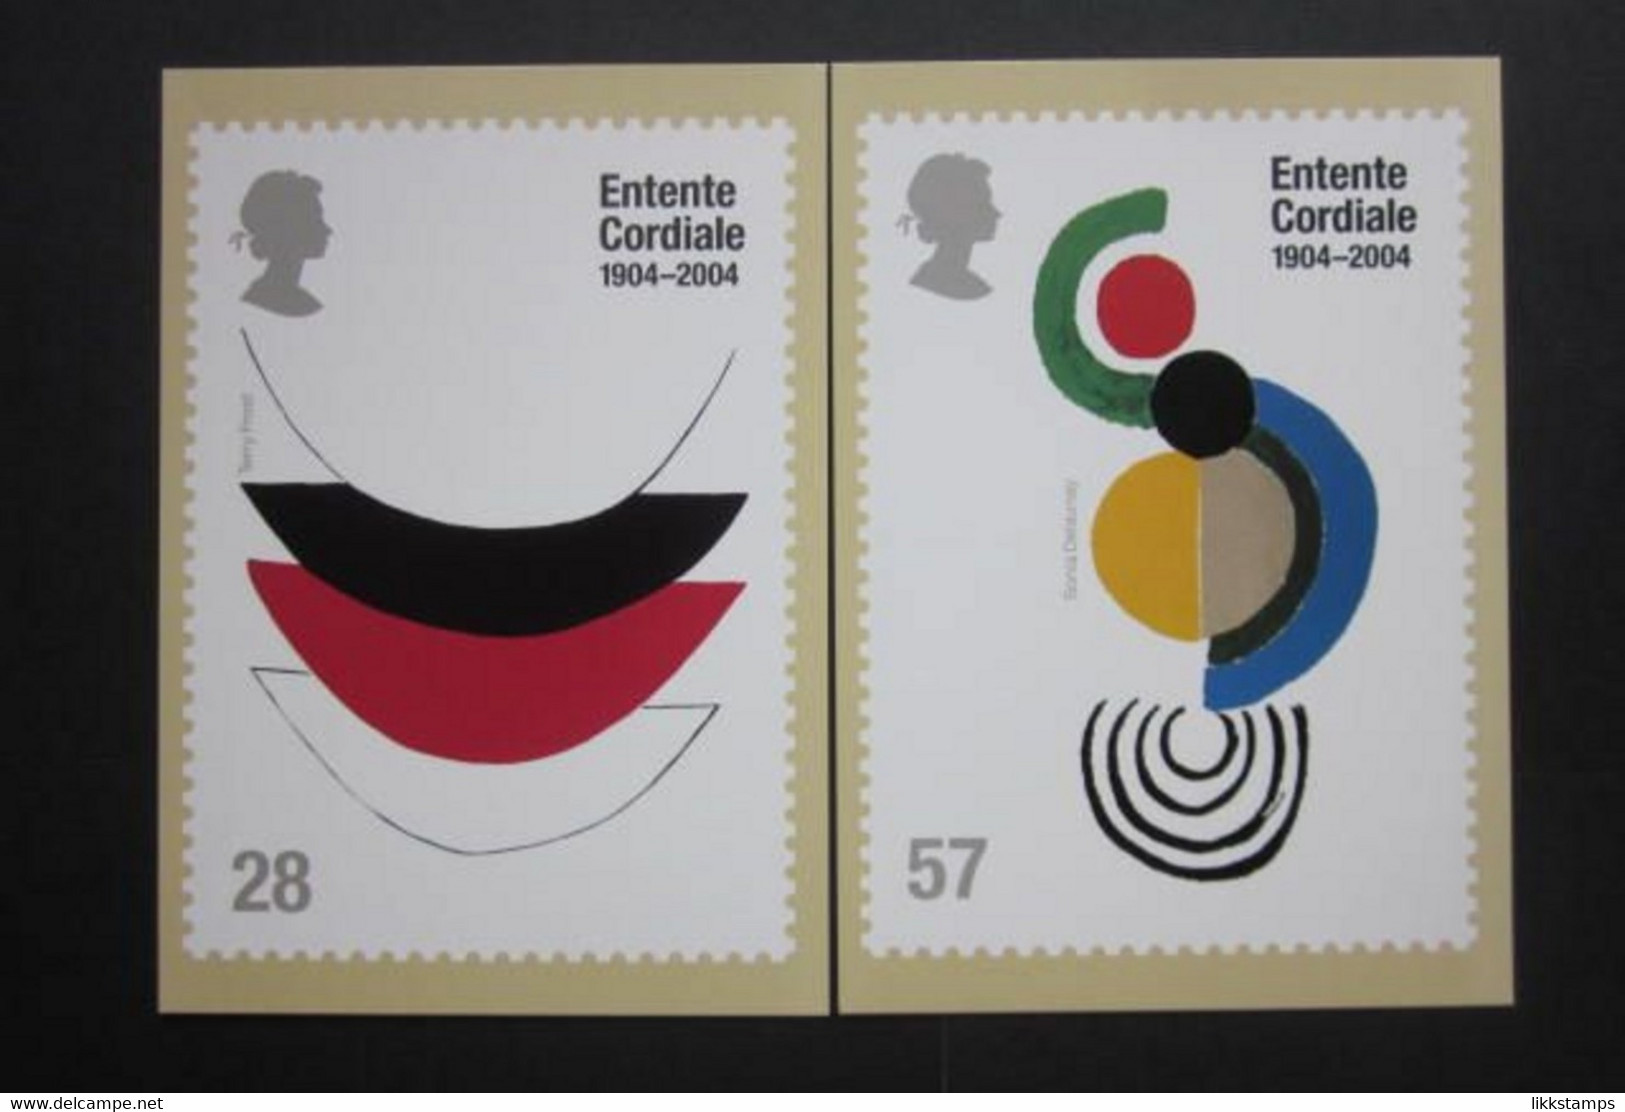 2004 THE CENTENARY OF THE ENTENTE CORDIALE P.H.Q. CARDS UNUSED, ISSUE No. 263 (B) #01519 - Cartes PHQ